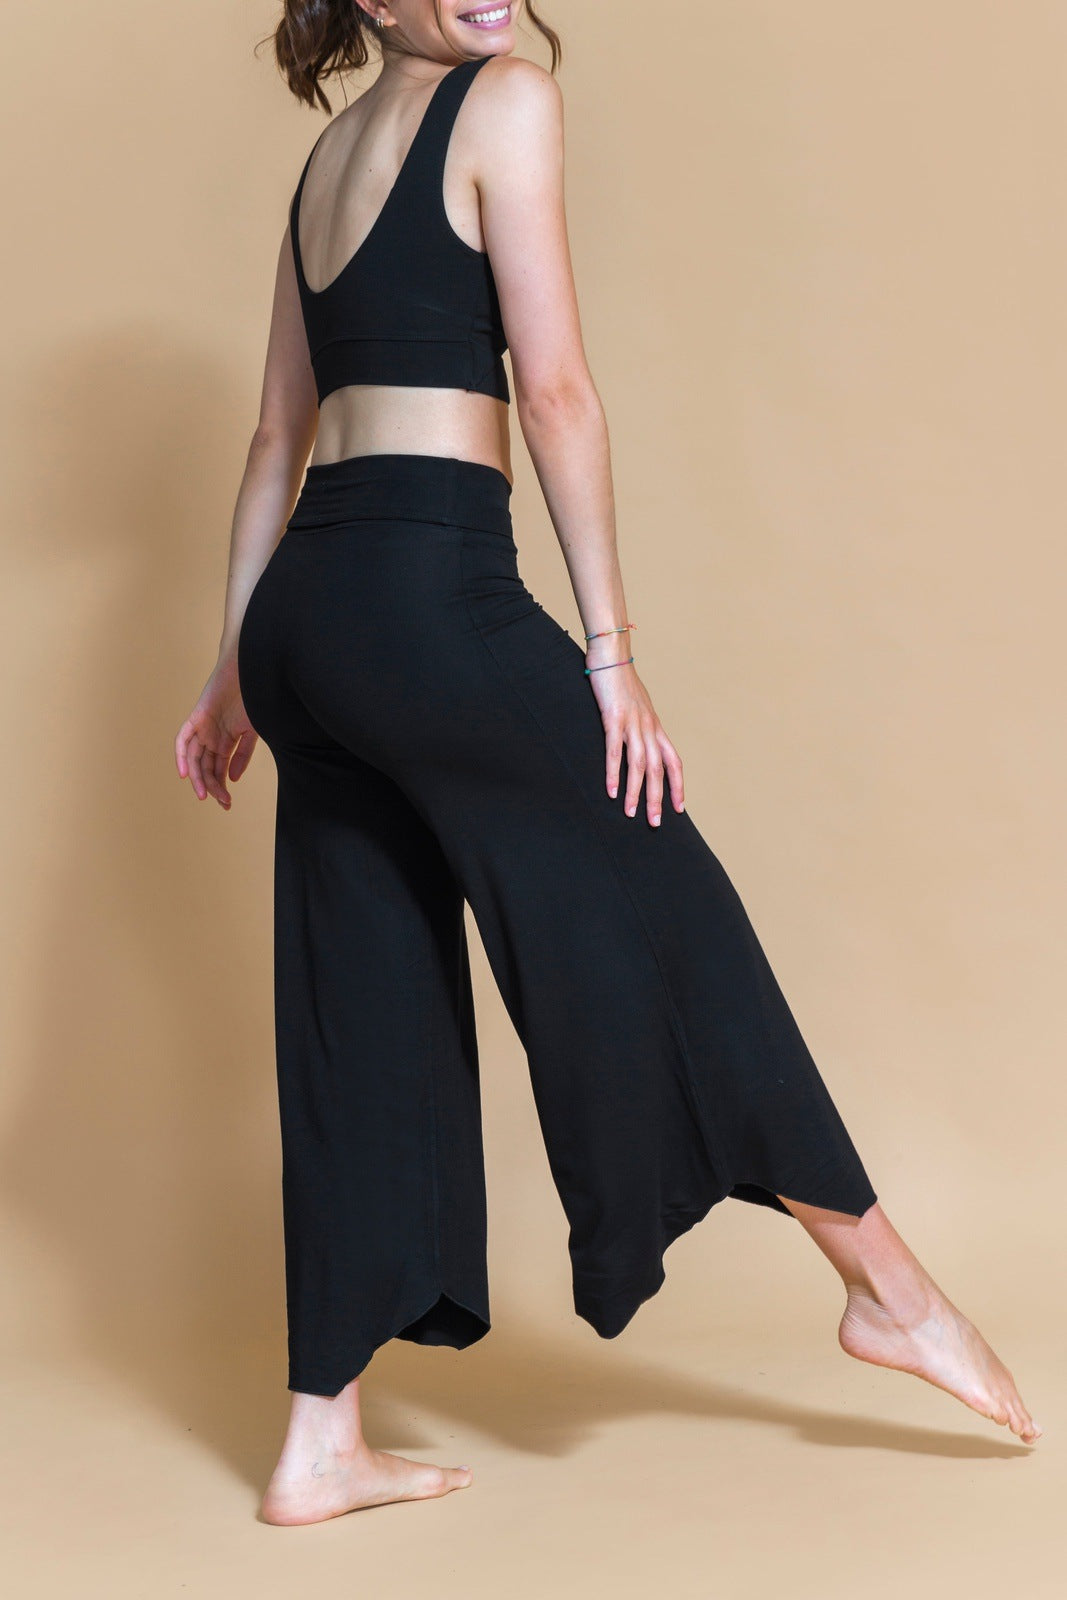 Shambhala Barcelona  Sustainable yoga wear to flow on and off the mat